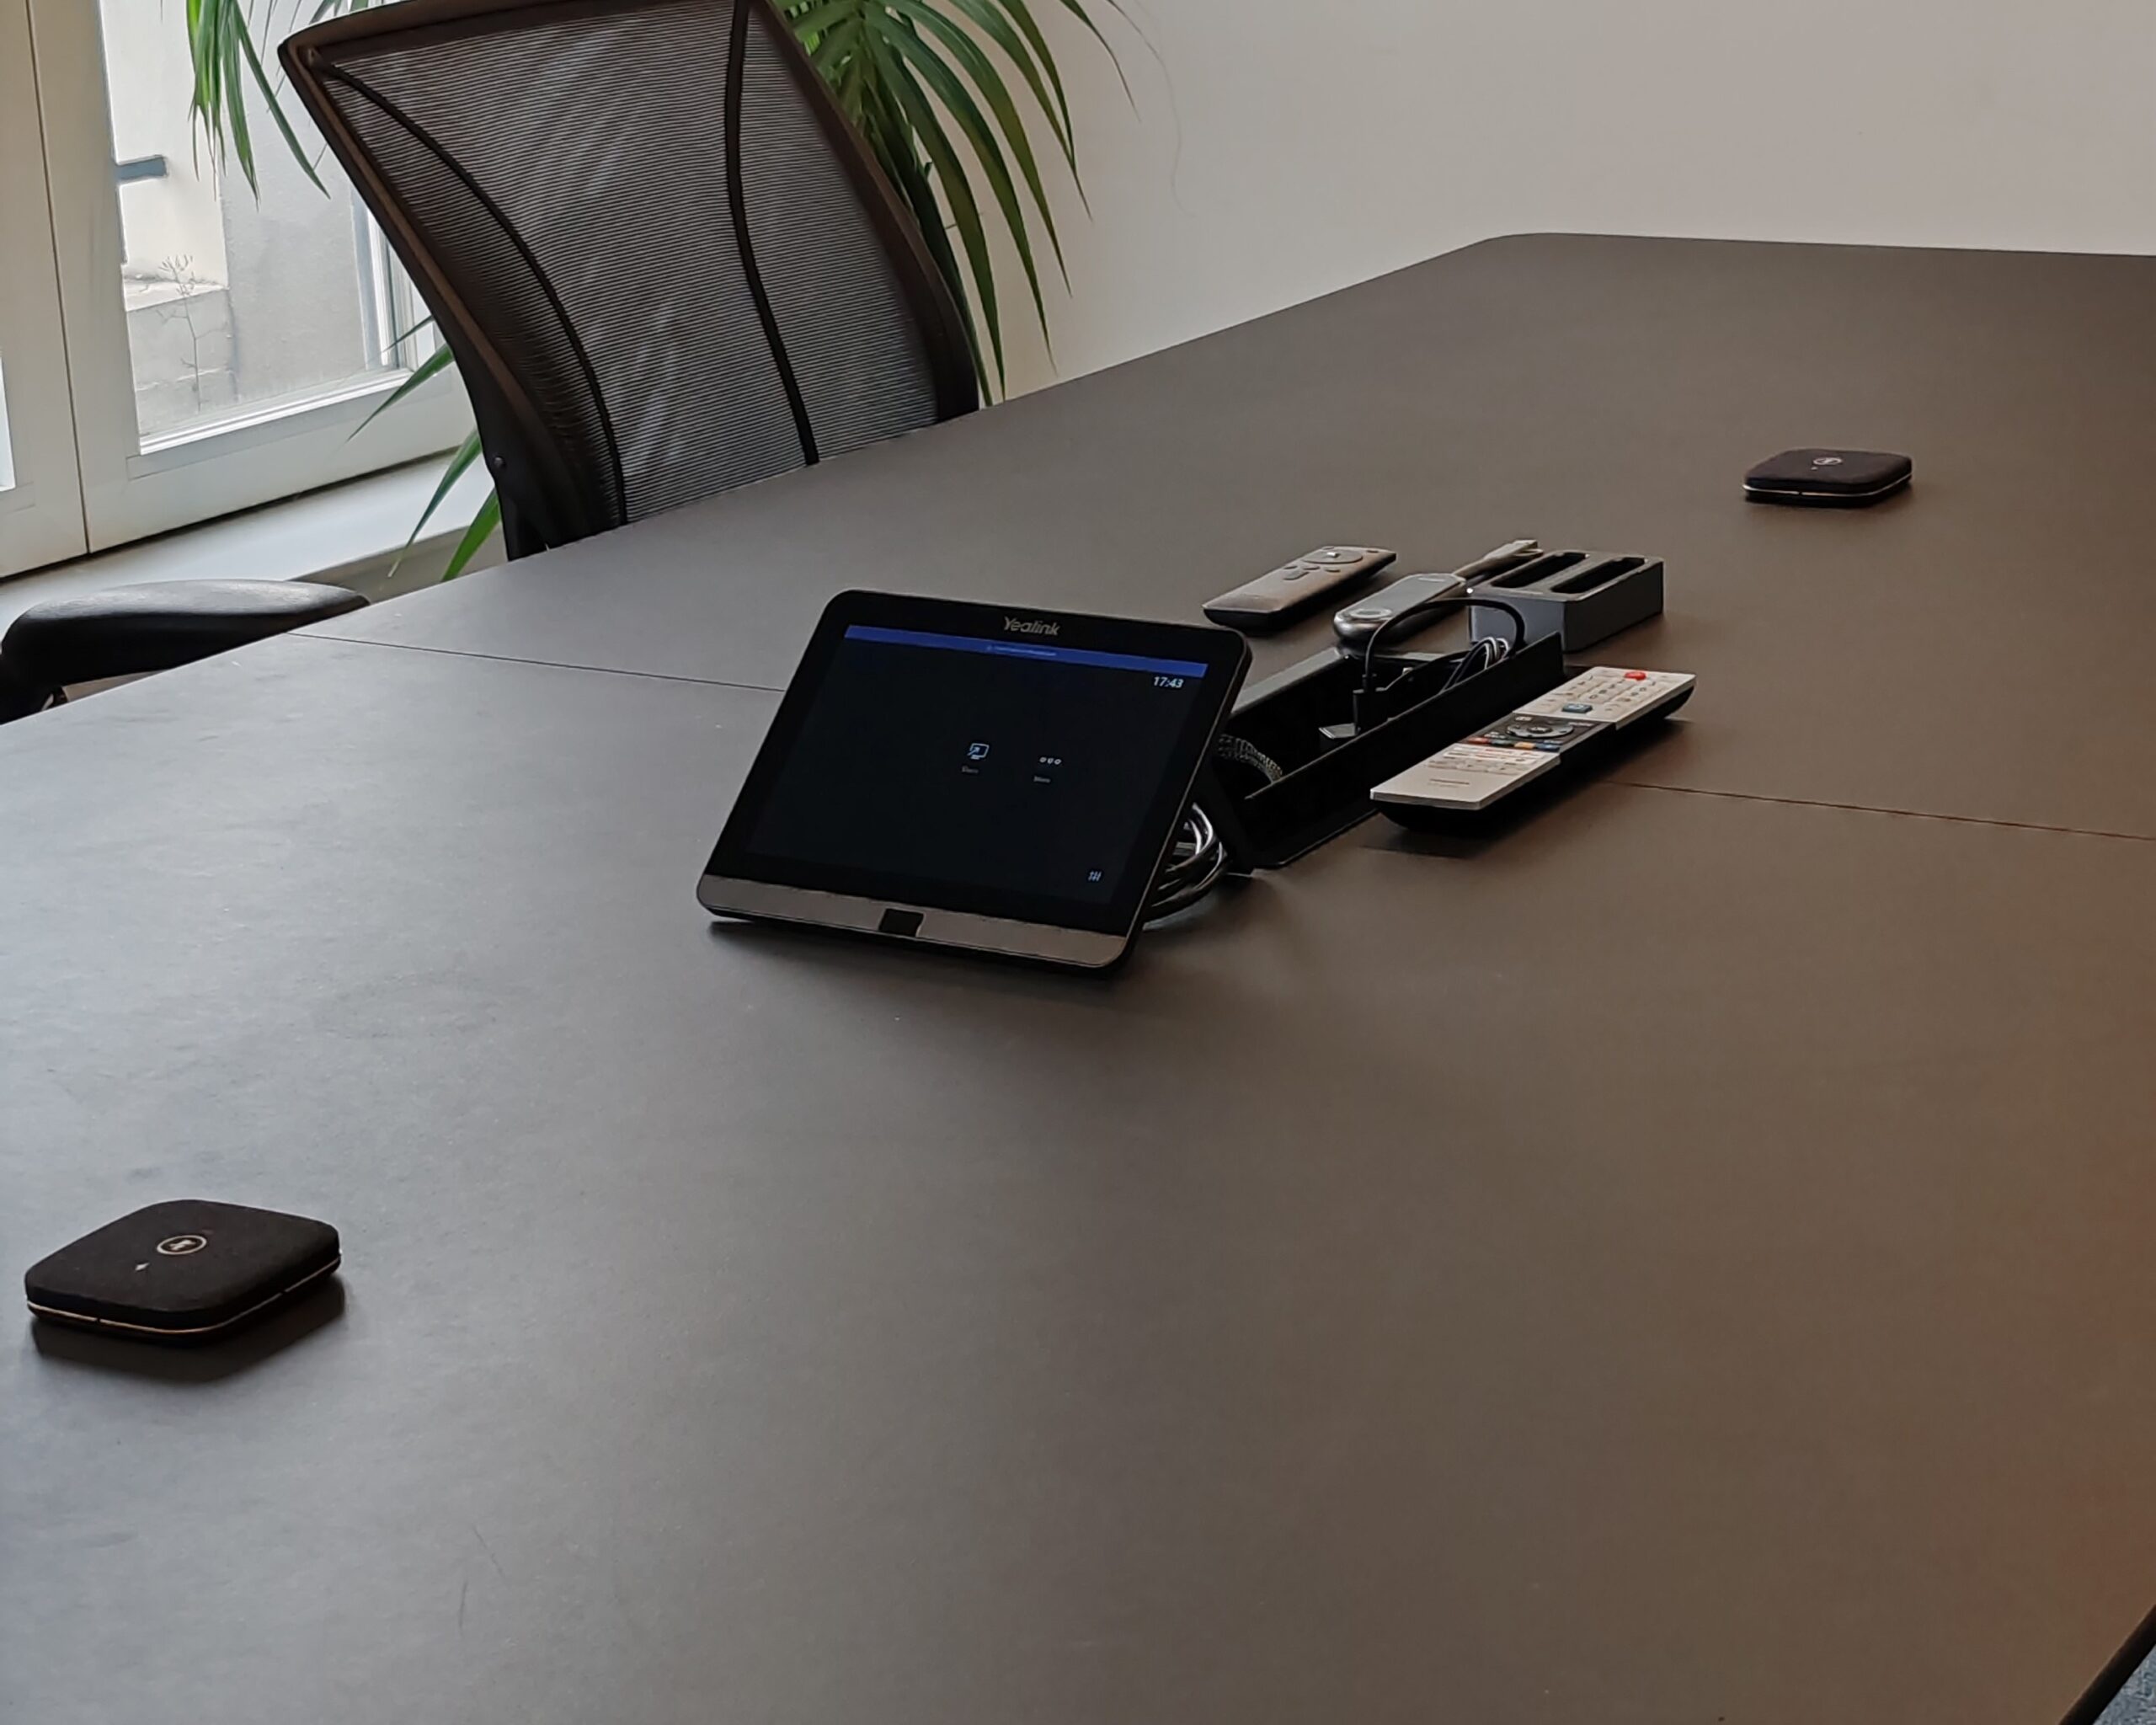 Yealink touch screen for meeting room efficiency